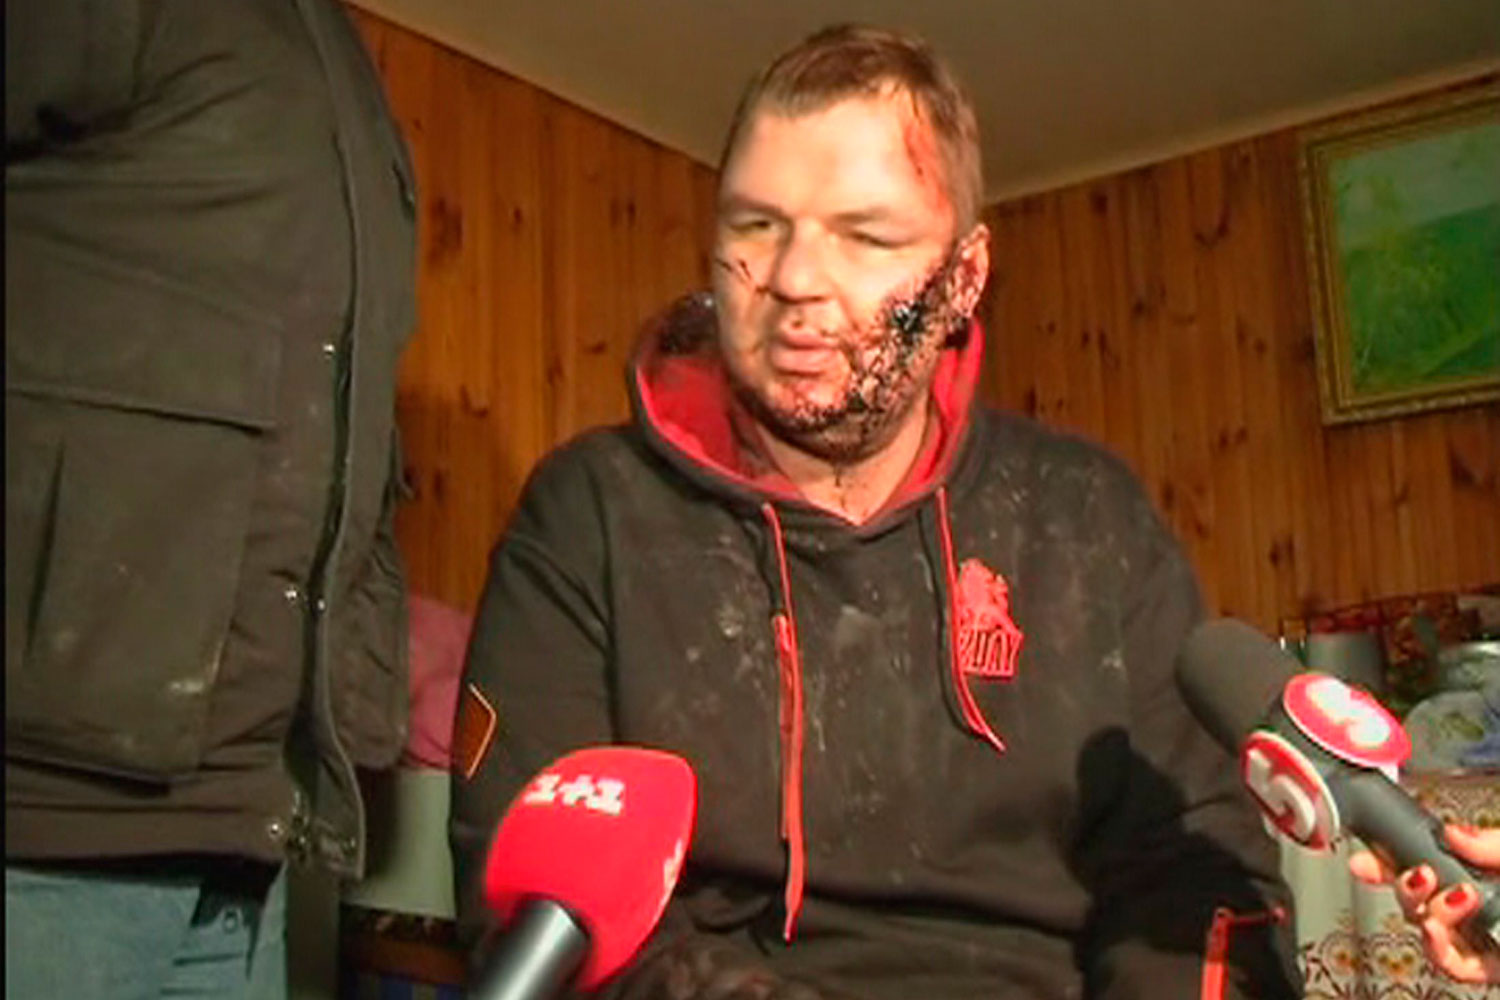 Dmytro Bulatov, 35, one of the leaders of anti-government protest motorcades called 'Automaidan', speaks to journalists after being found near Kiev, Jan. 30, 2014.